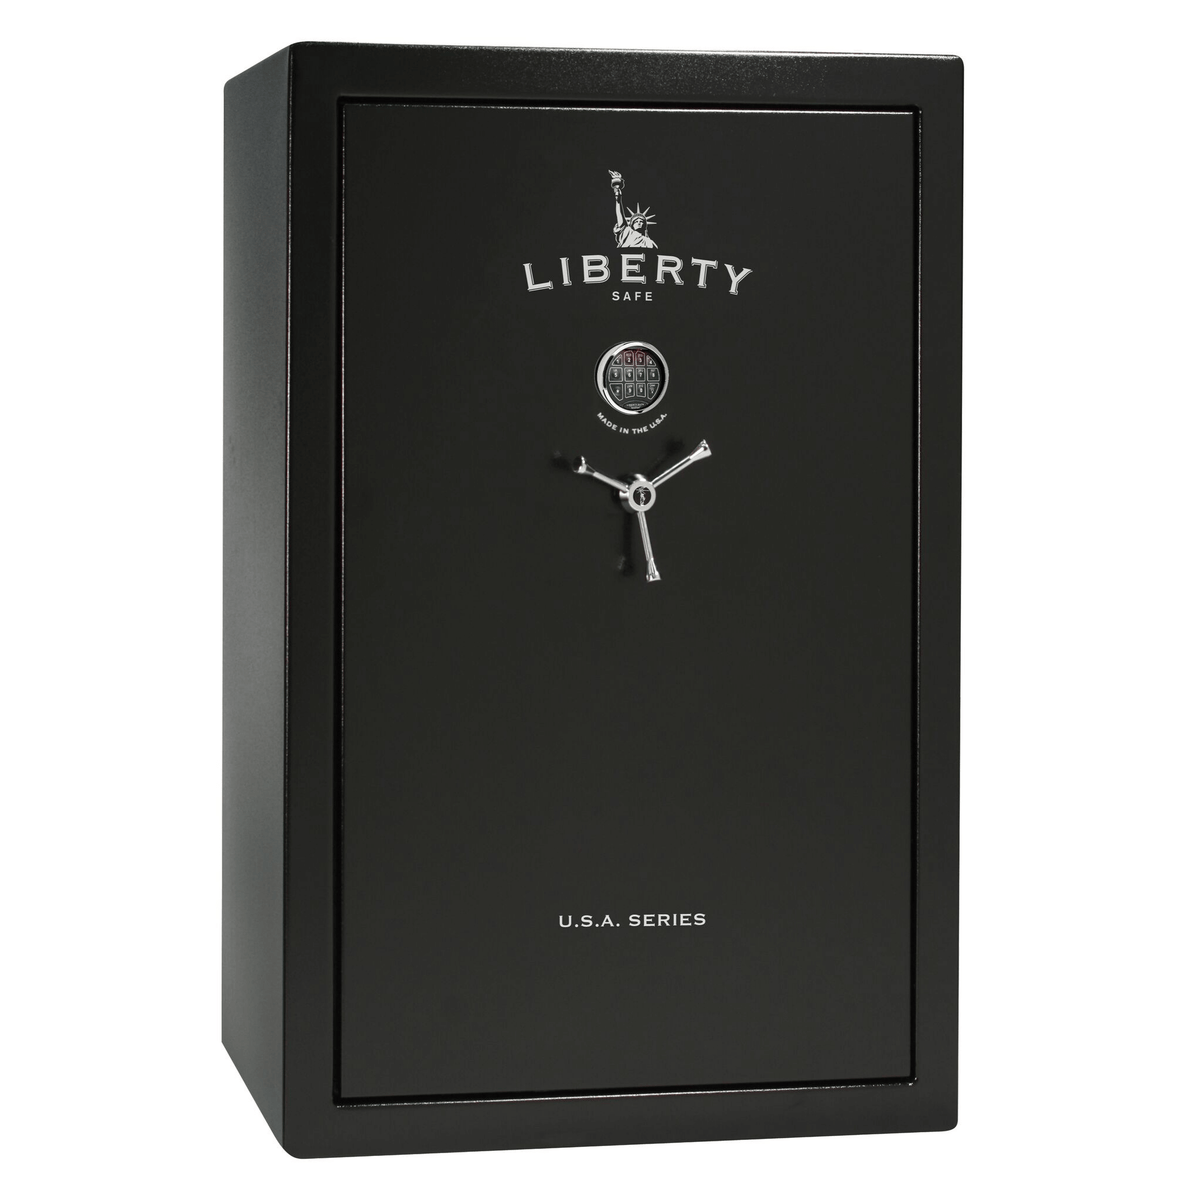 Liberty USA 48 safe in textured black with chrome electronic lock.